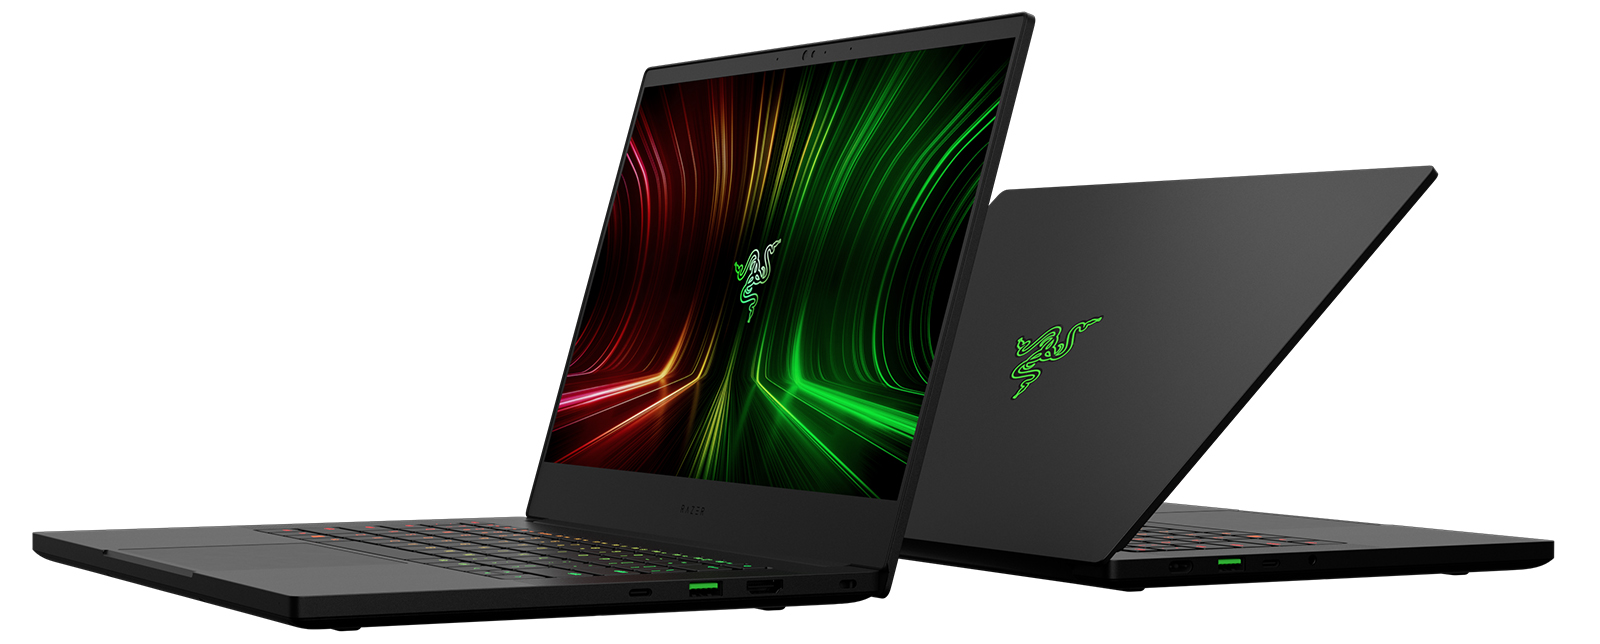 The Razer Blade 14 is a Powerhouse Laptop with an Impressive Display